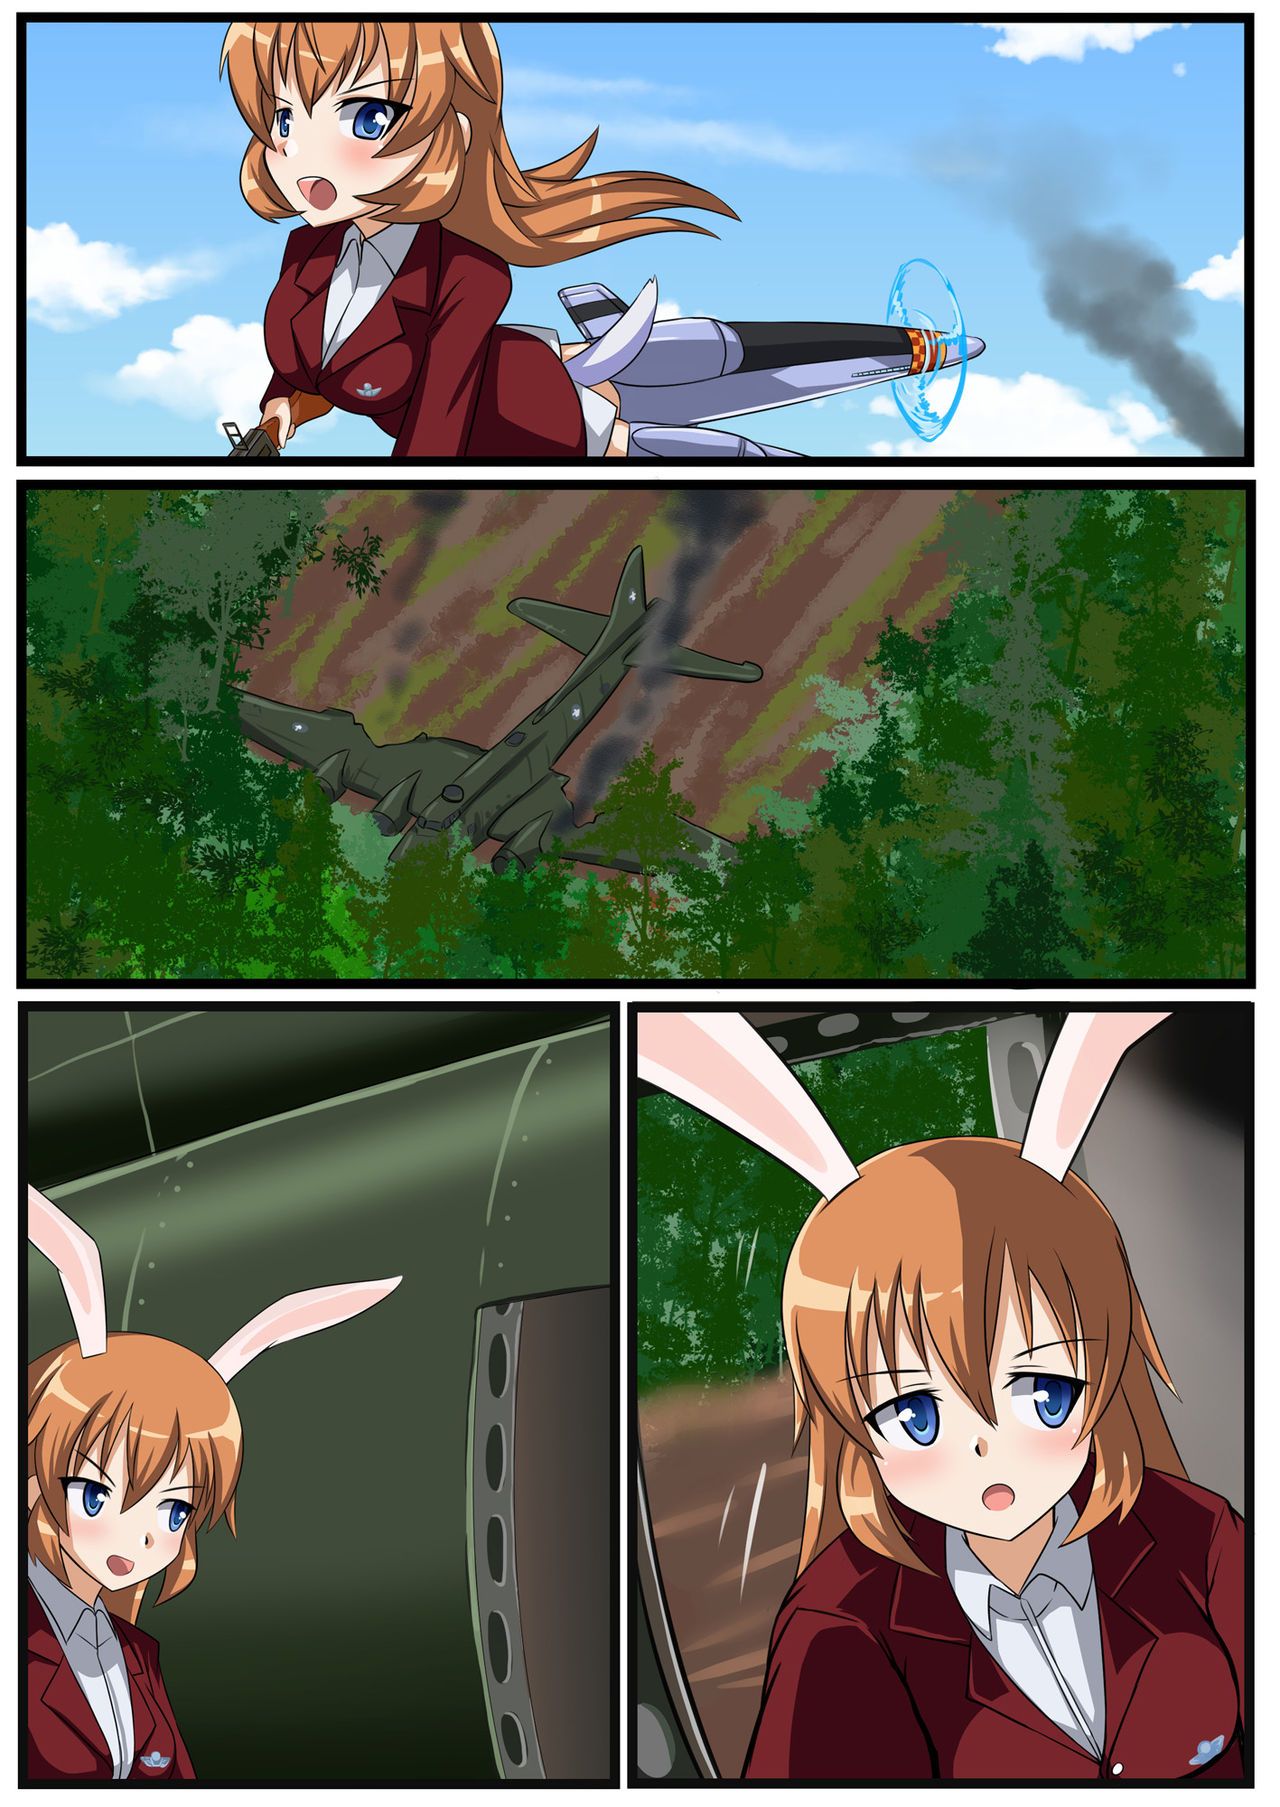 [Red Axis] Install Vore On Witches (Strike Witches) 3